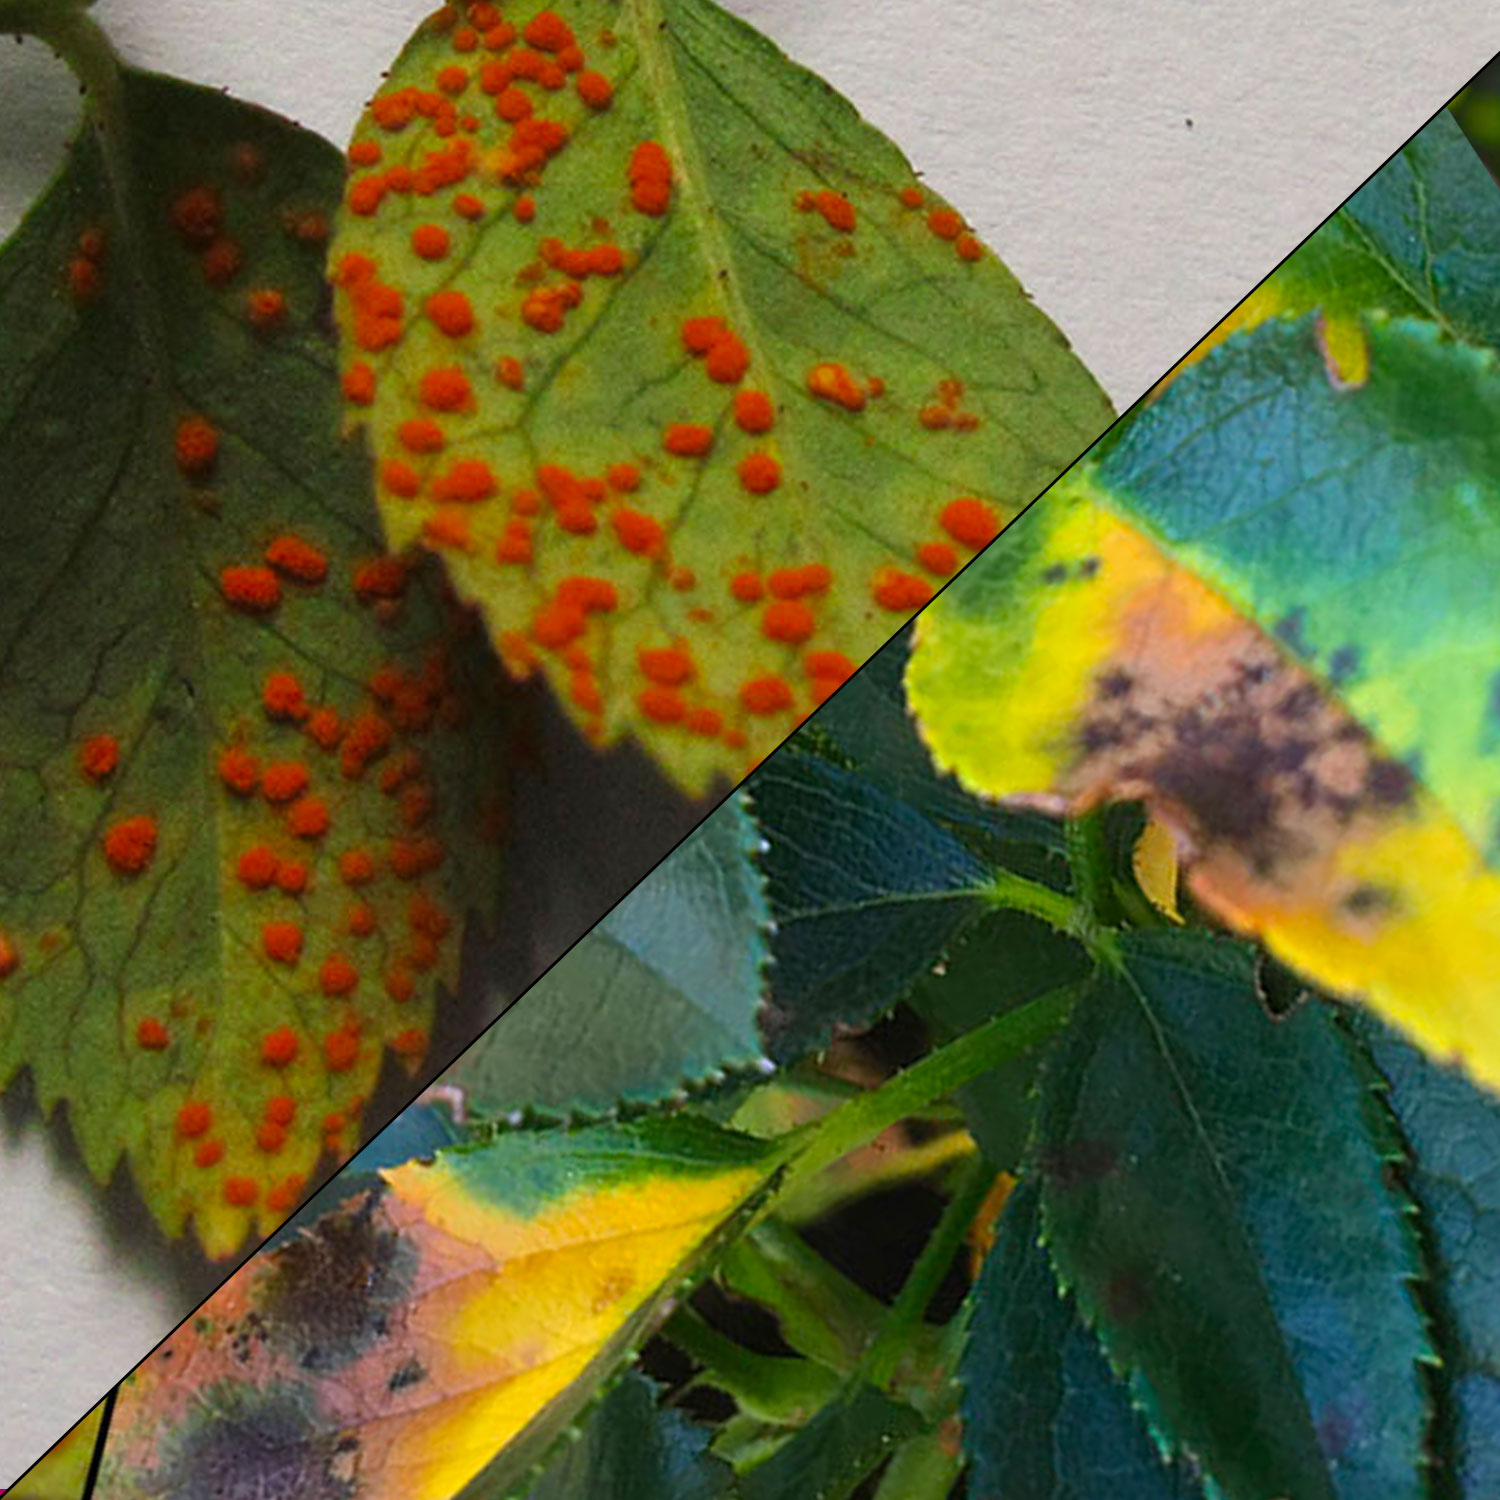 How to Fix Rose Rust and Blackspot